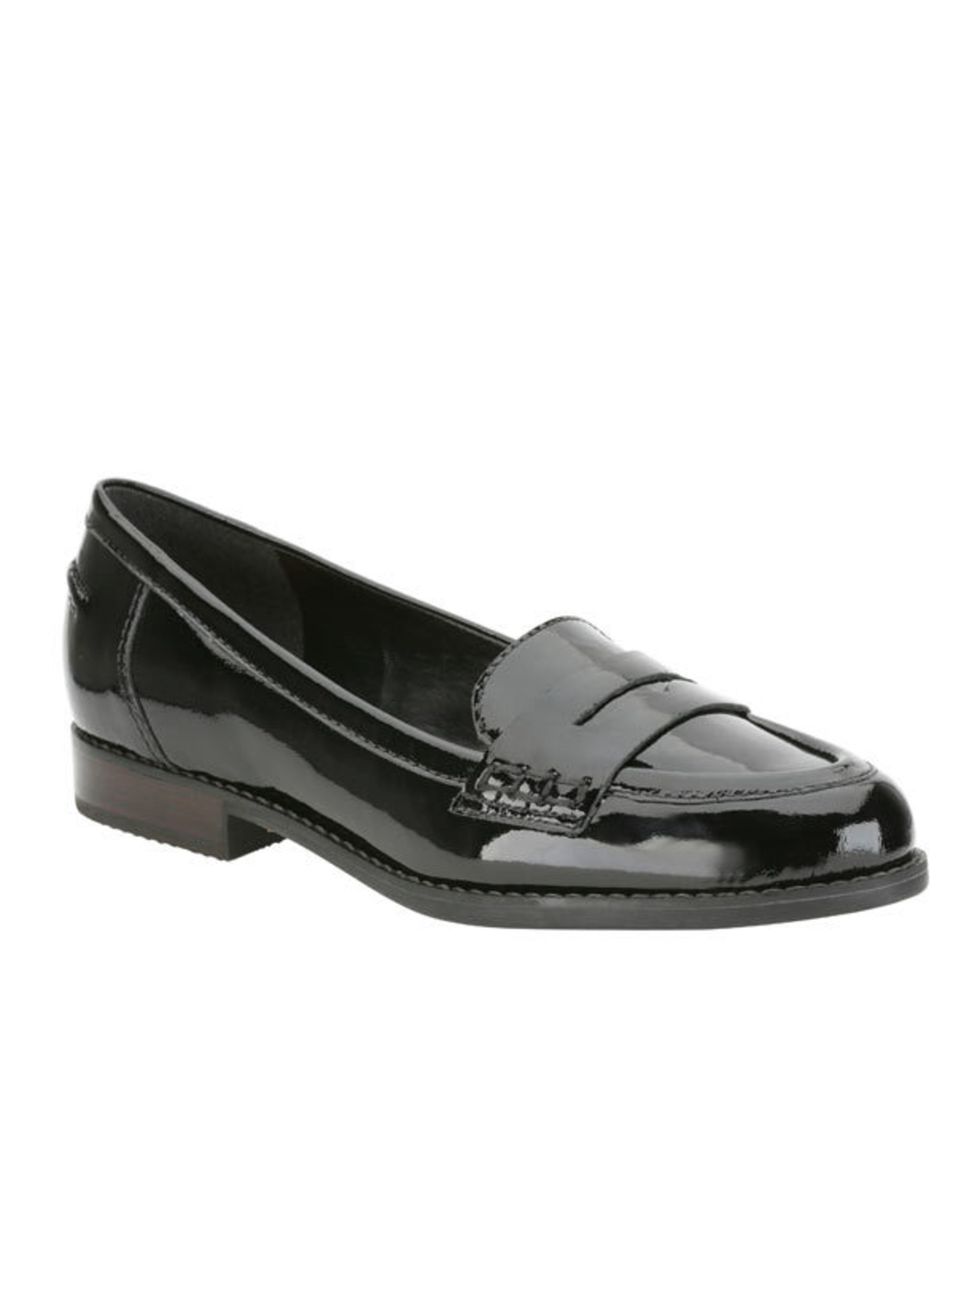 <p>Black patent loafers, £44.99, by <a href="http://www.clarks.co.uk/find/keyword-is-Crepe+Suzette/product-is-20334825">Clarks</a> </p>